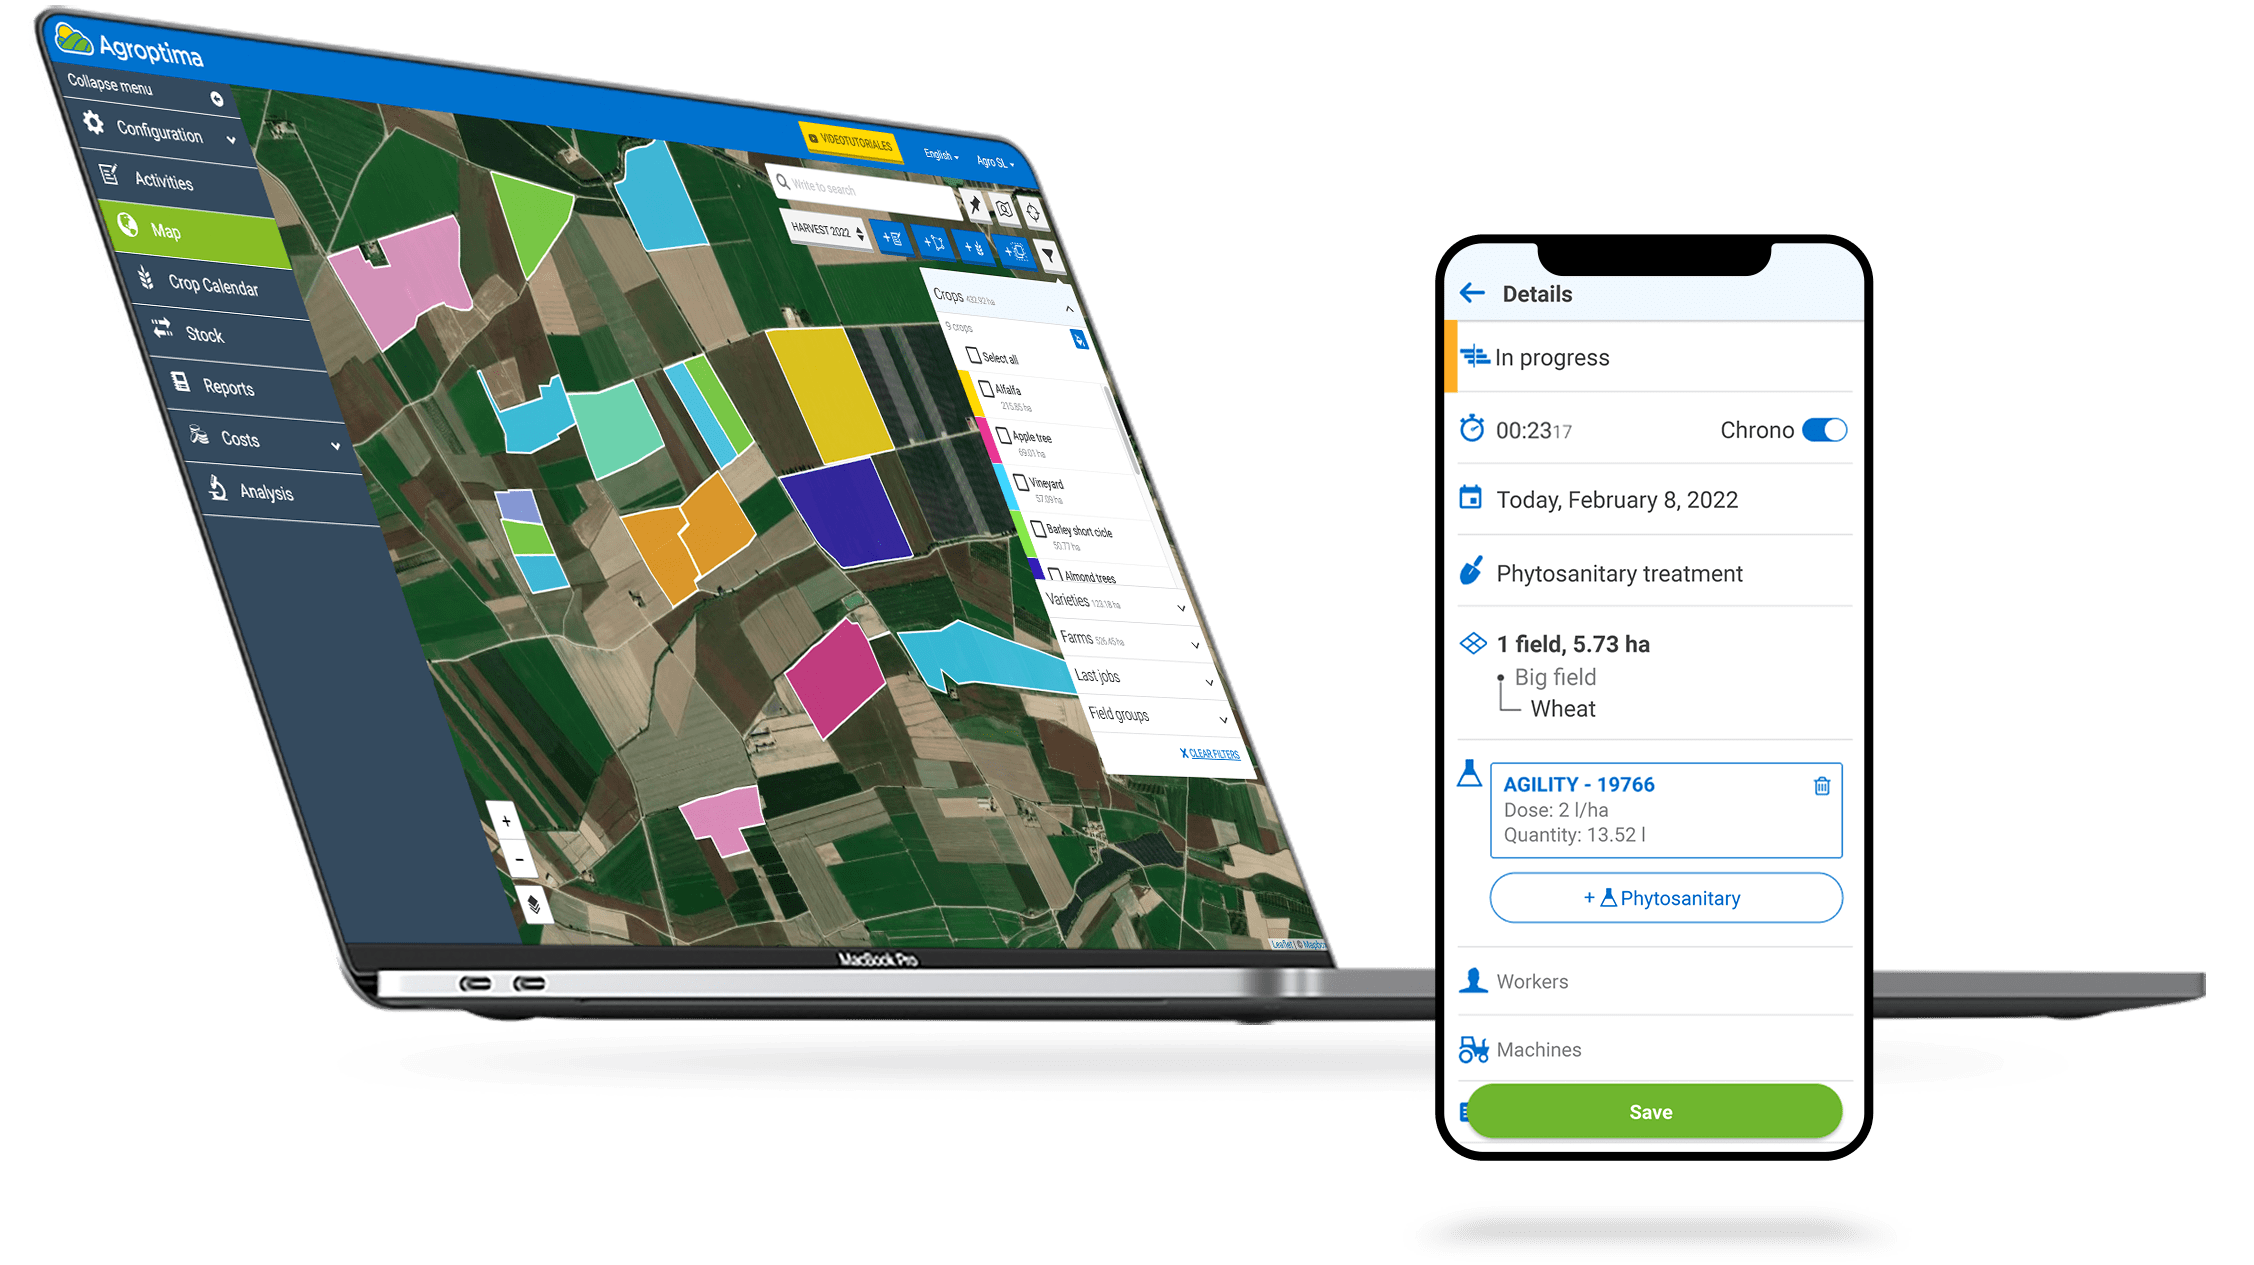 agricultural software